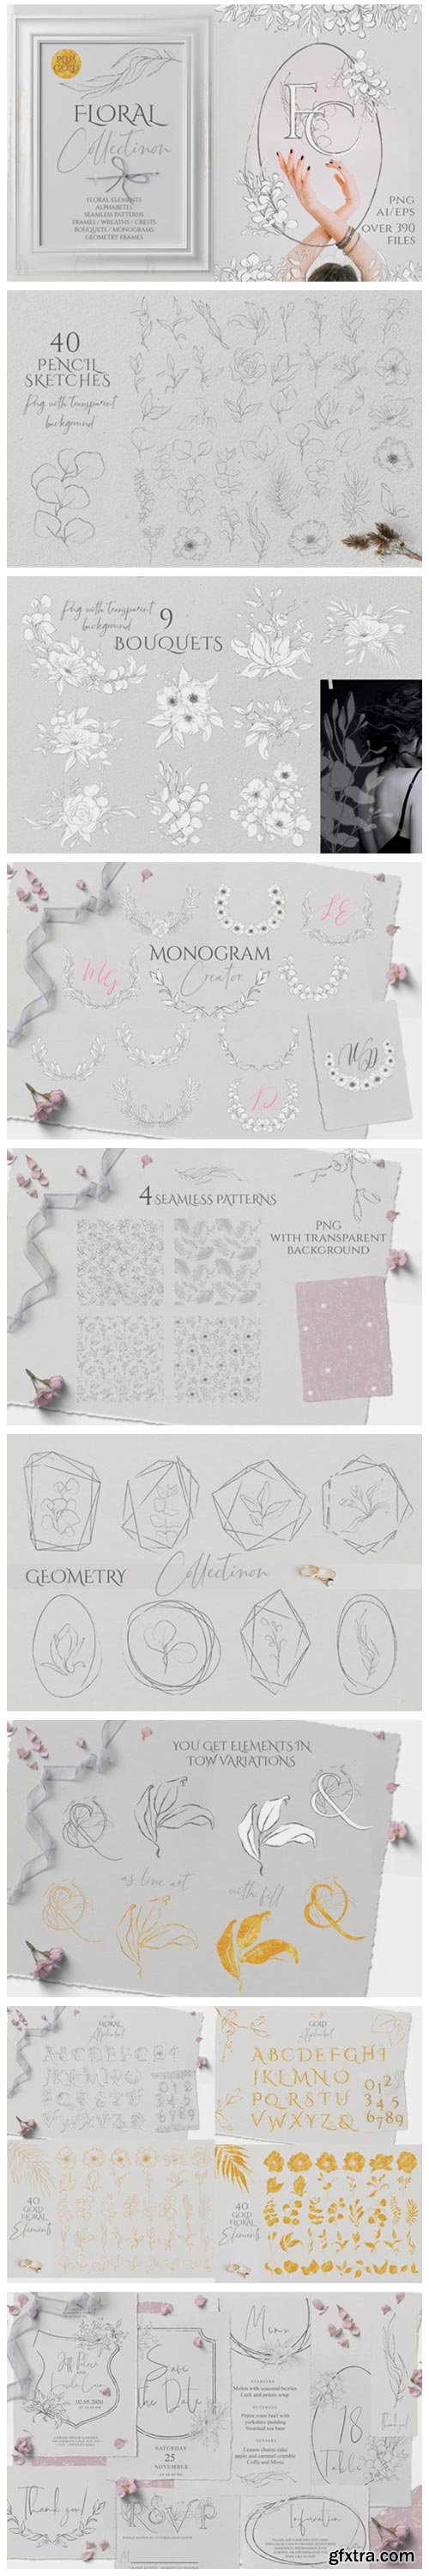 Floral Sketch Collection 2761386